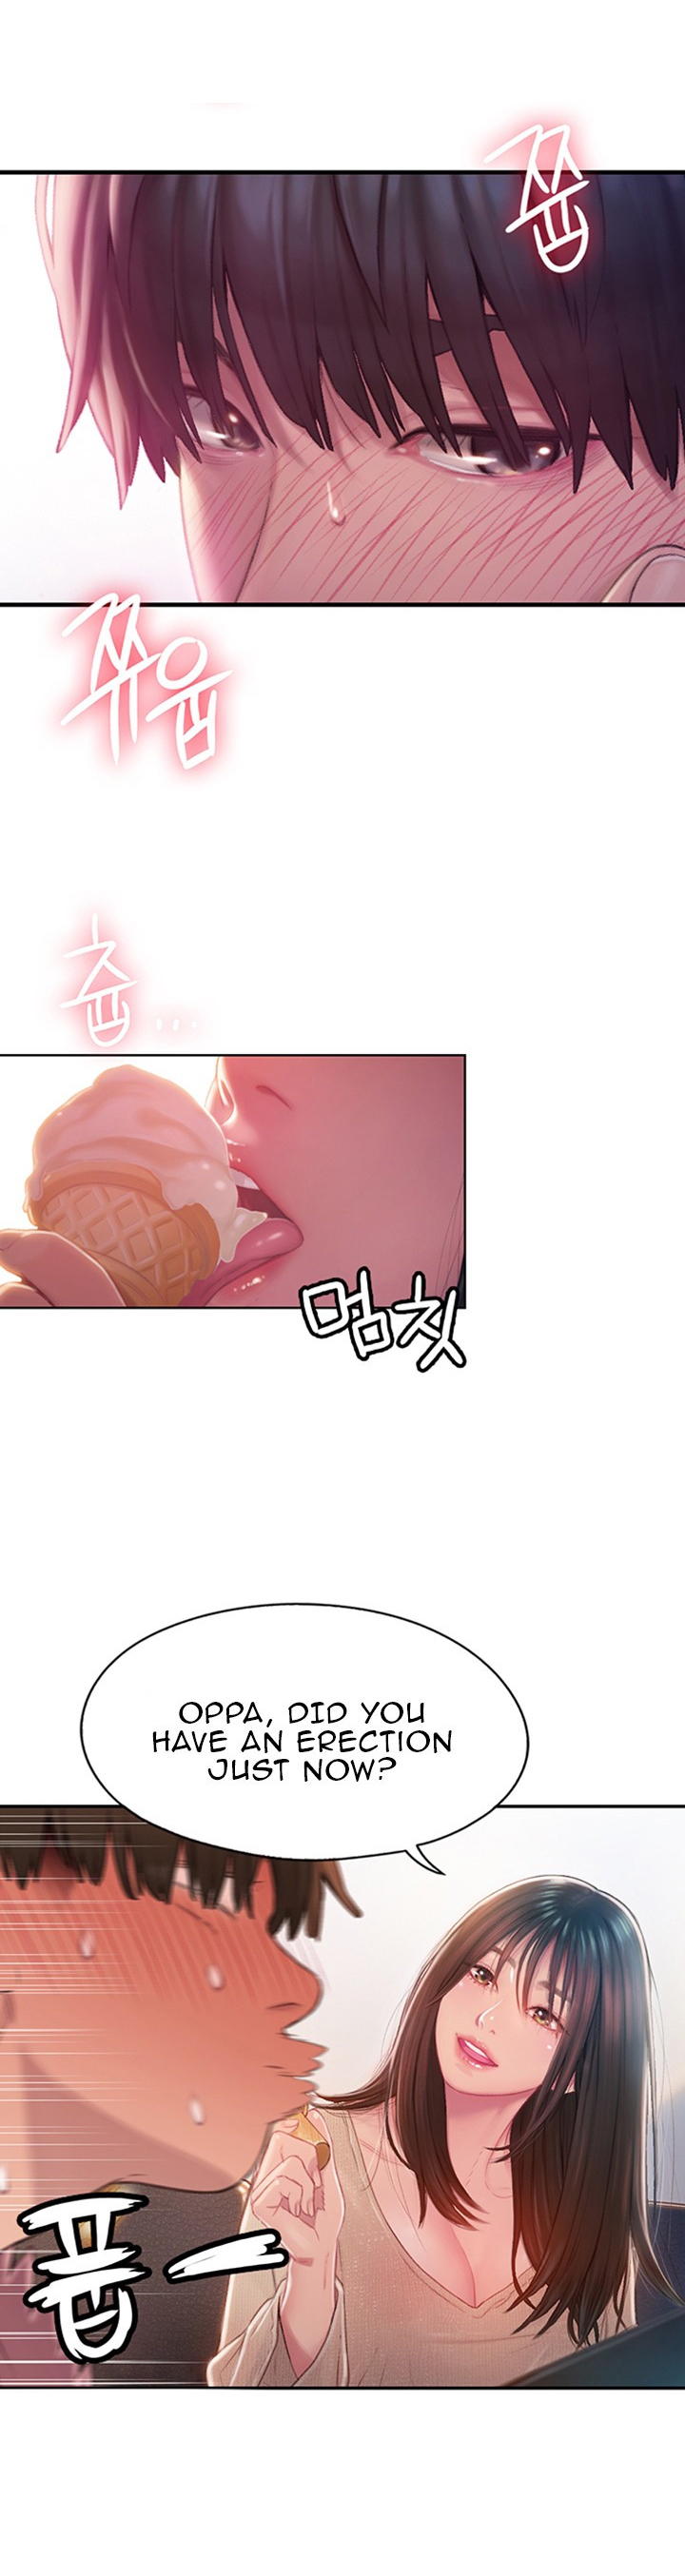 [Park Hyeongjun] Love Limit Exceeded (01-27) Ongoing - Page 4